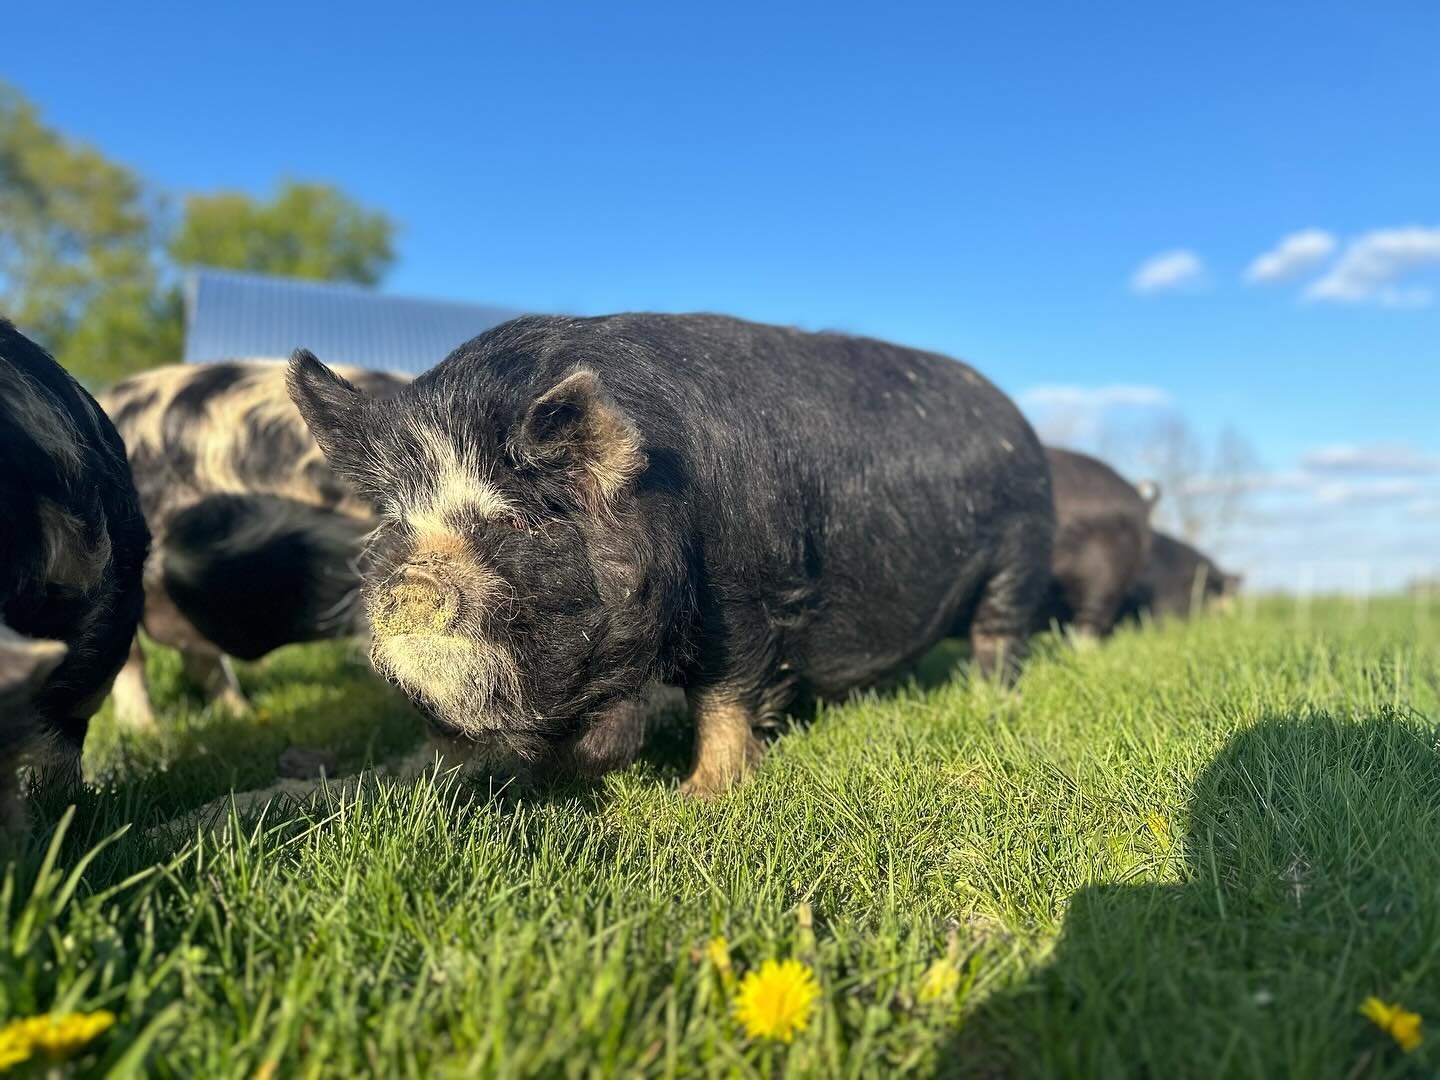 This is &ldquo;Big Black&rdquo;&hellip;my Prototype Pig. If I could make 100 more like him I would. Thankfully, mom &amp; dad live here so I can 🤓 The variability of KuneKunes is so fun and interesting. What will be an even better case study is: doe